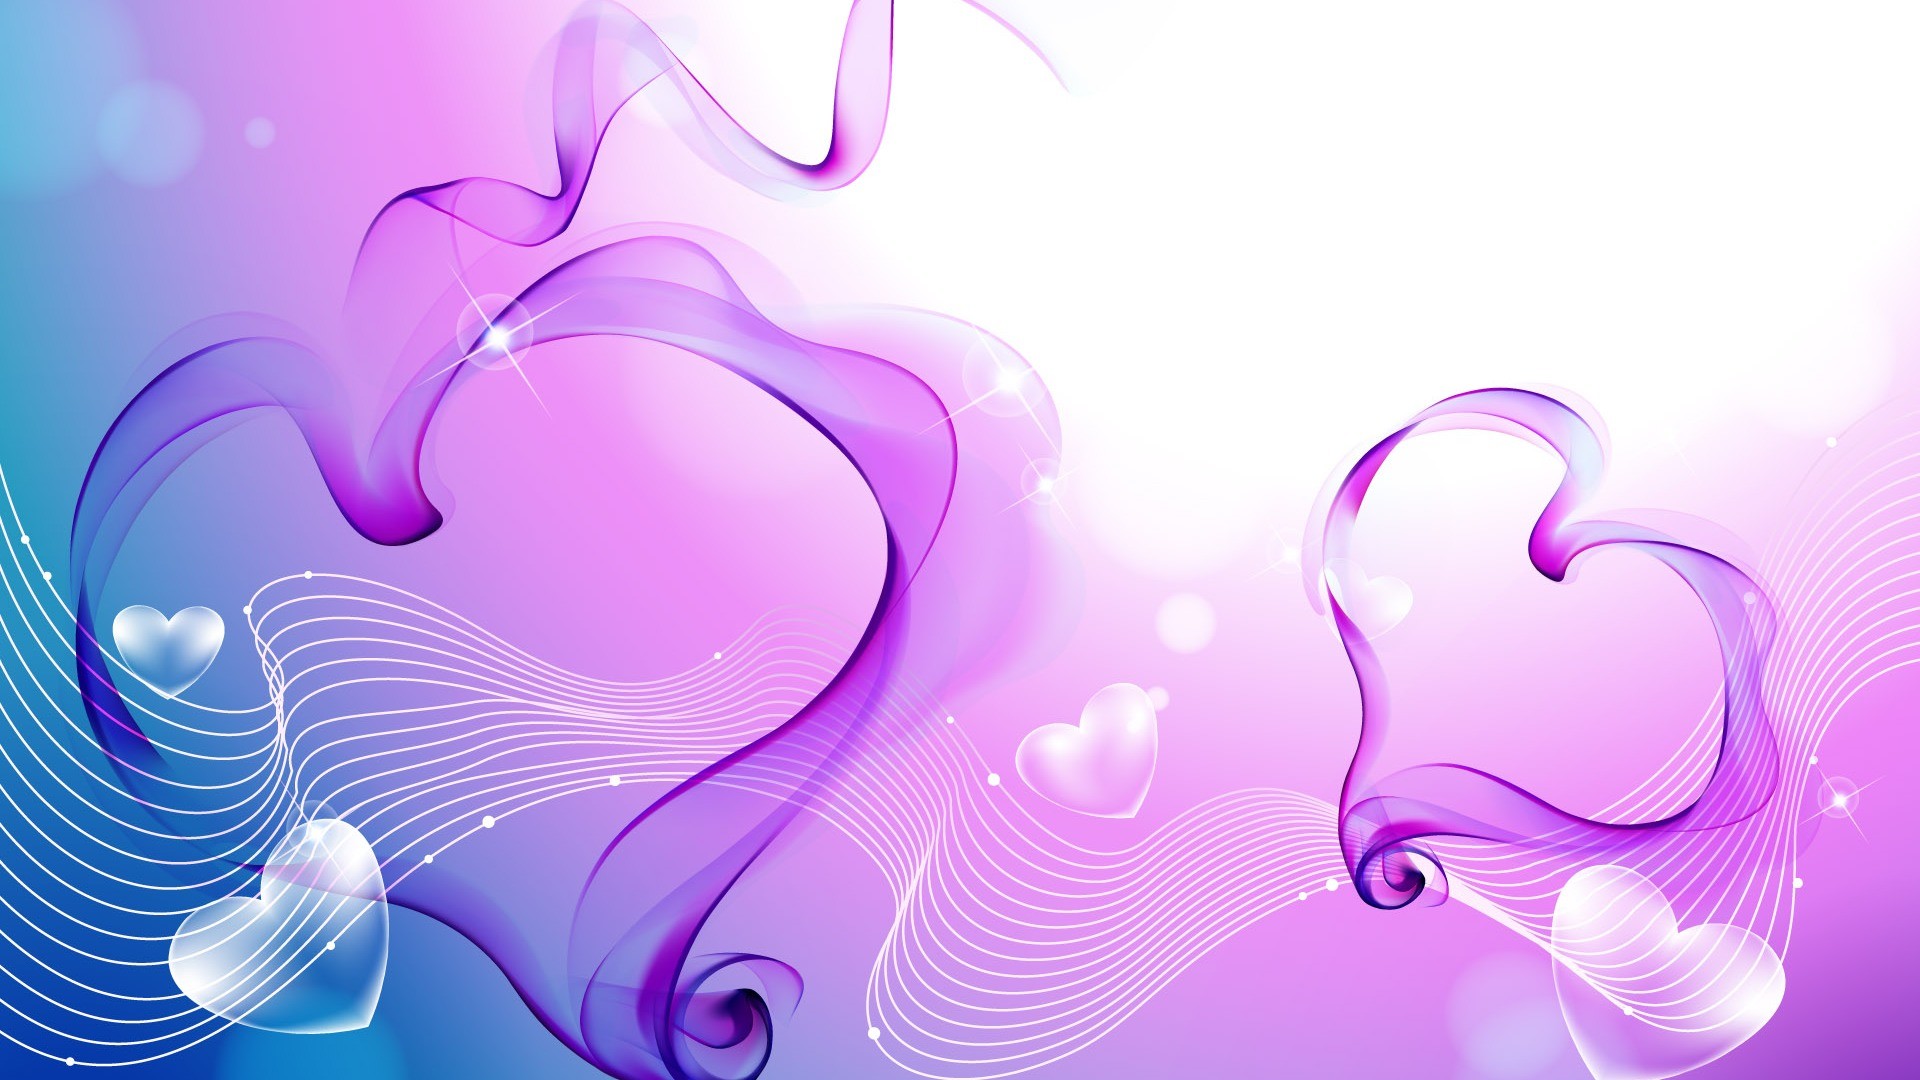 1920x1080 Cool Backgrounds with Abstract Love Shape in Purple